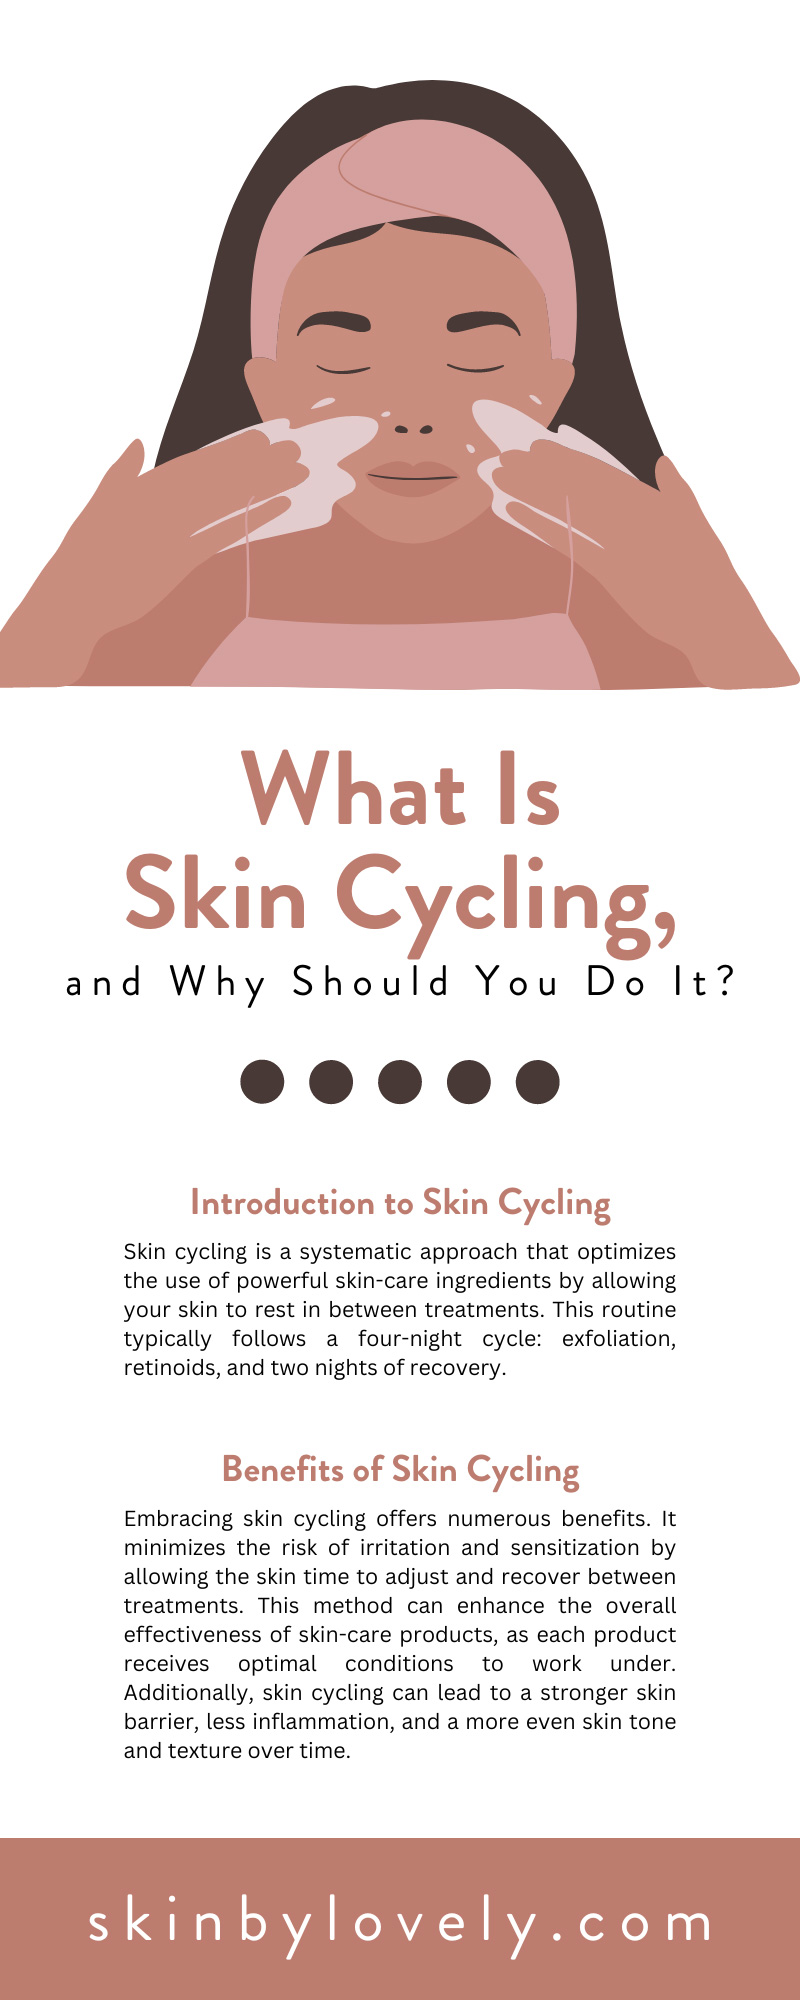 What Is Skin Cycling, and Why Should You Do It?